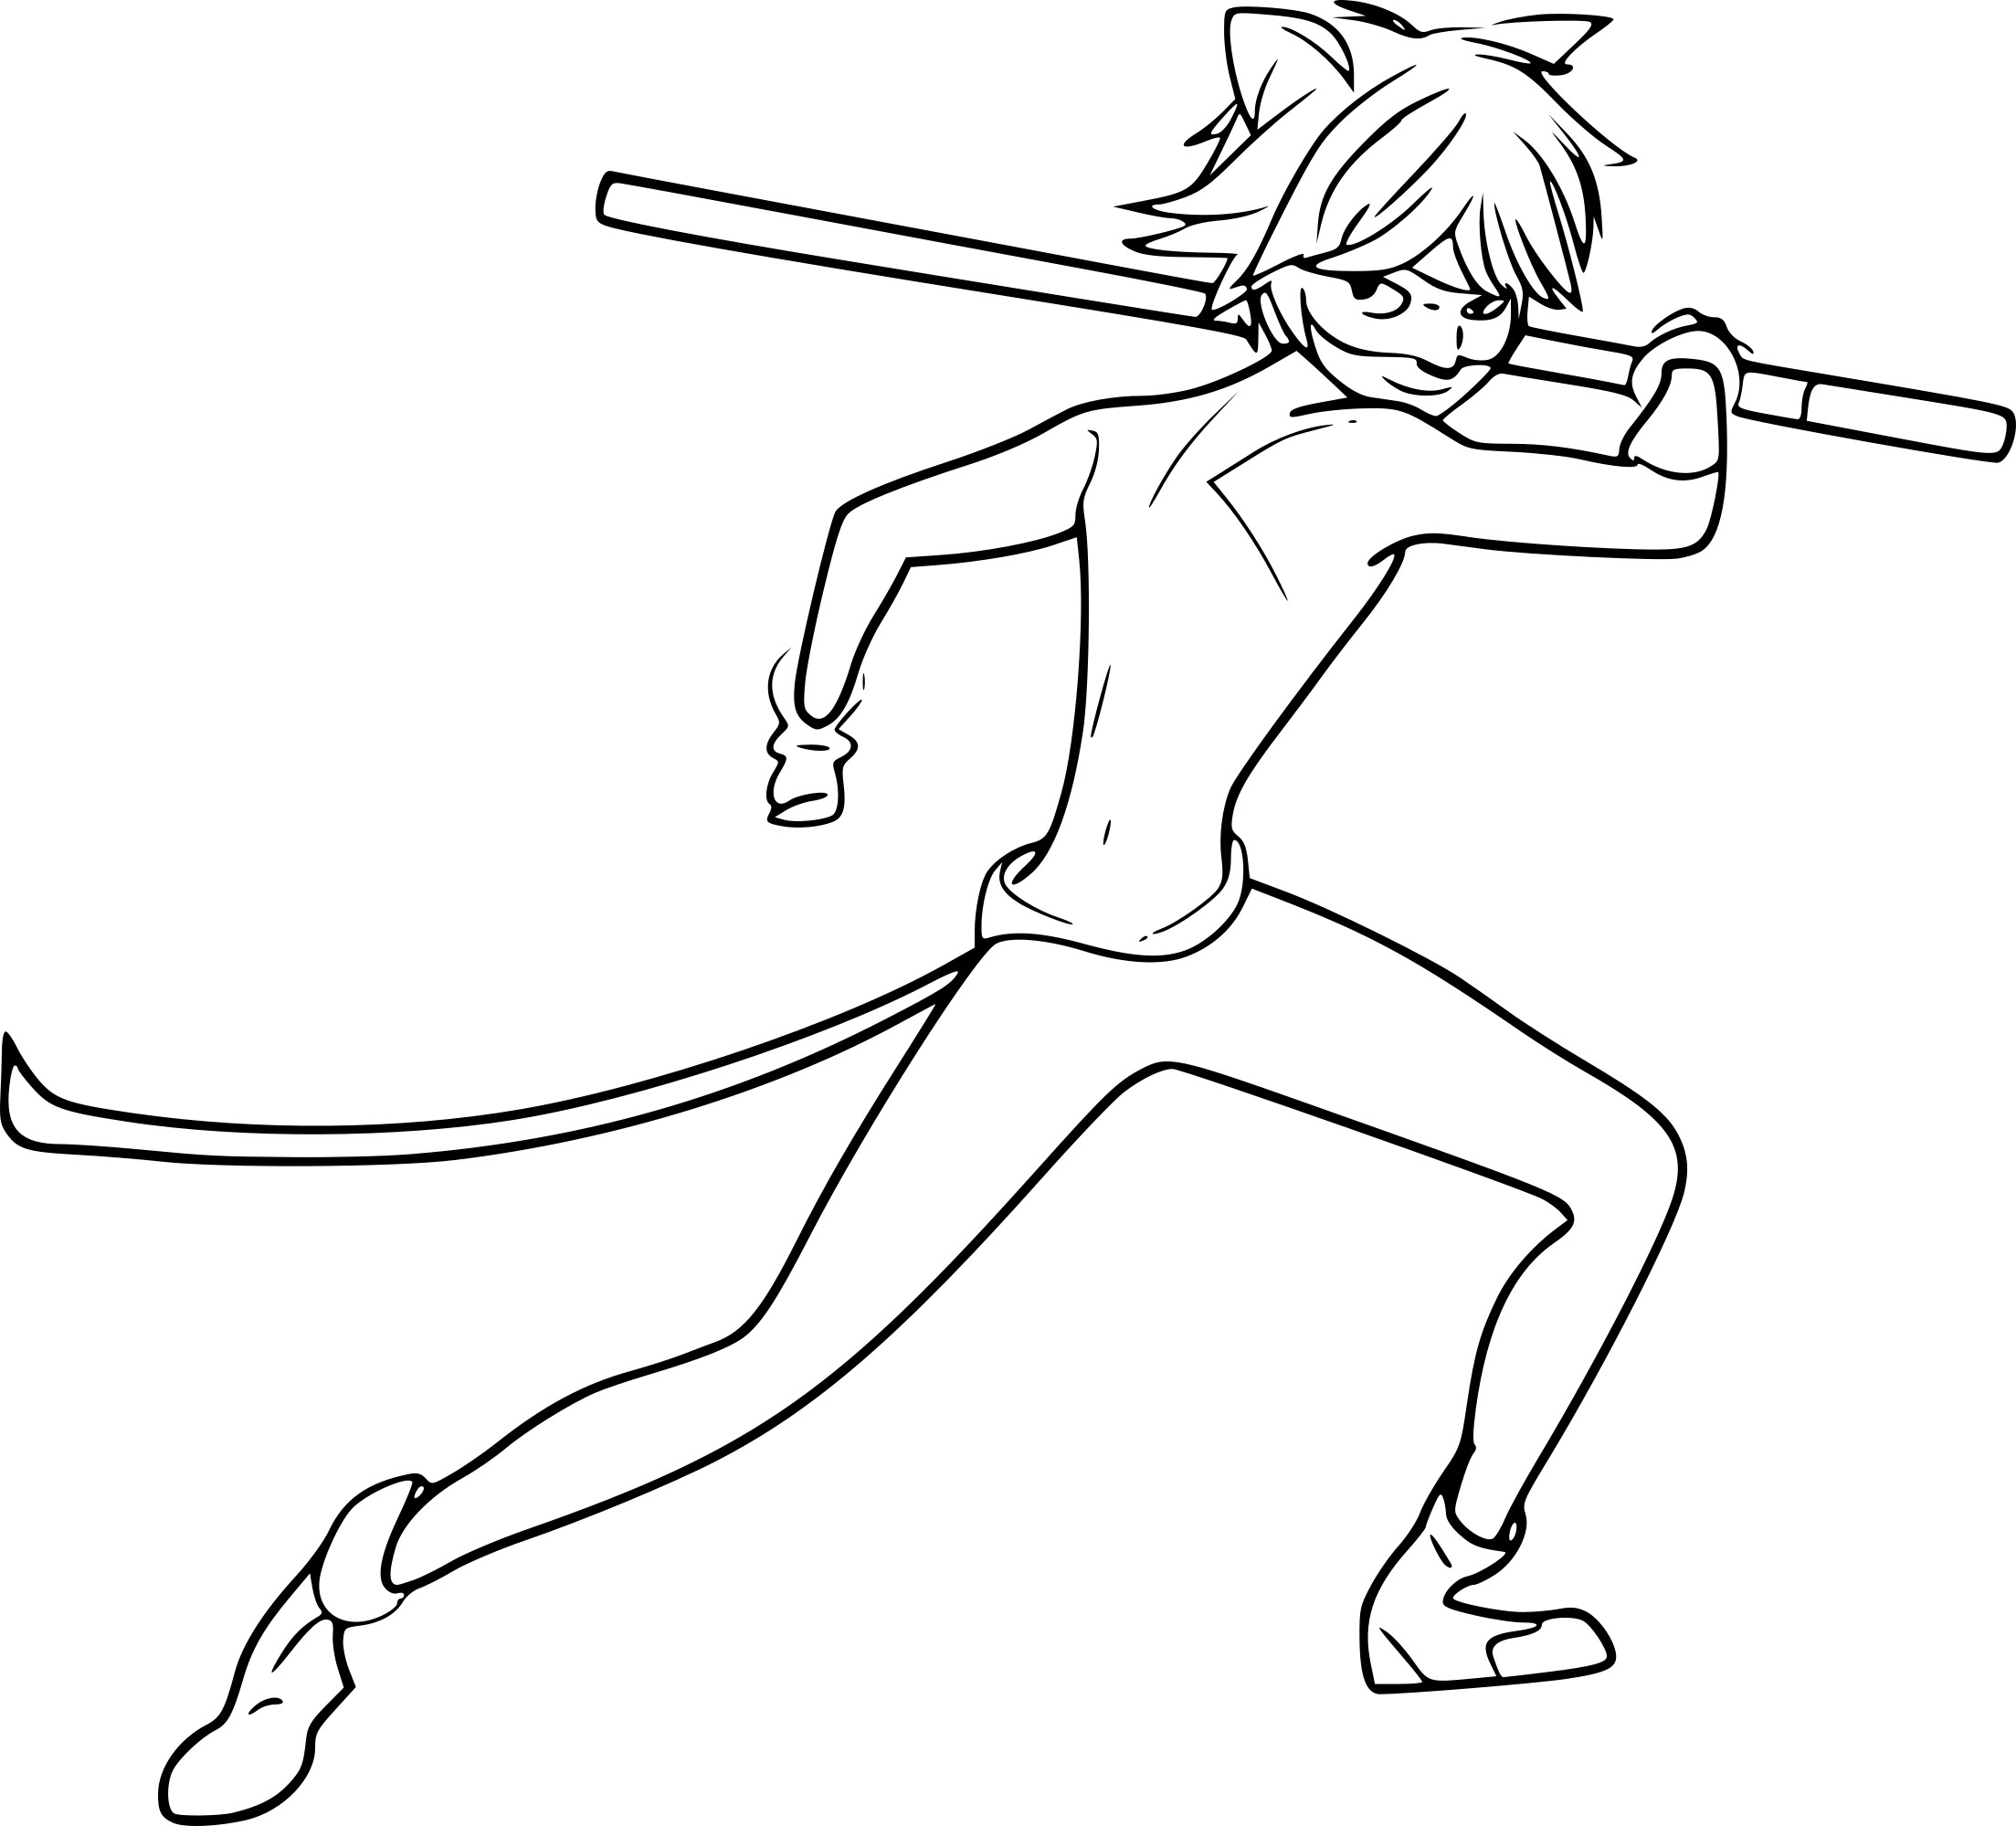 Cat Noir Fighting Coloring Page Free Printable Coloring Pages For Kids